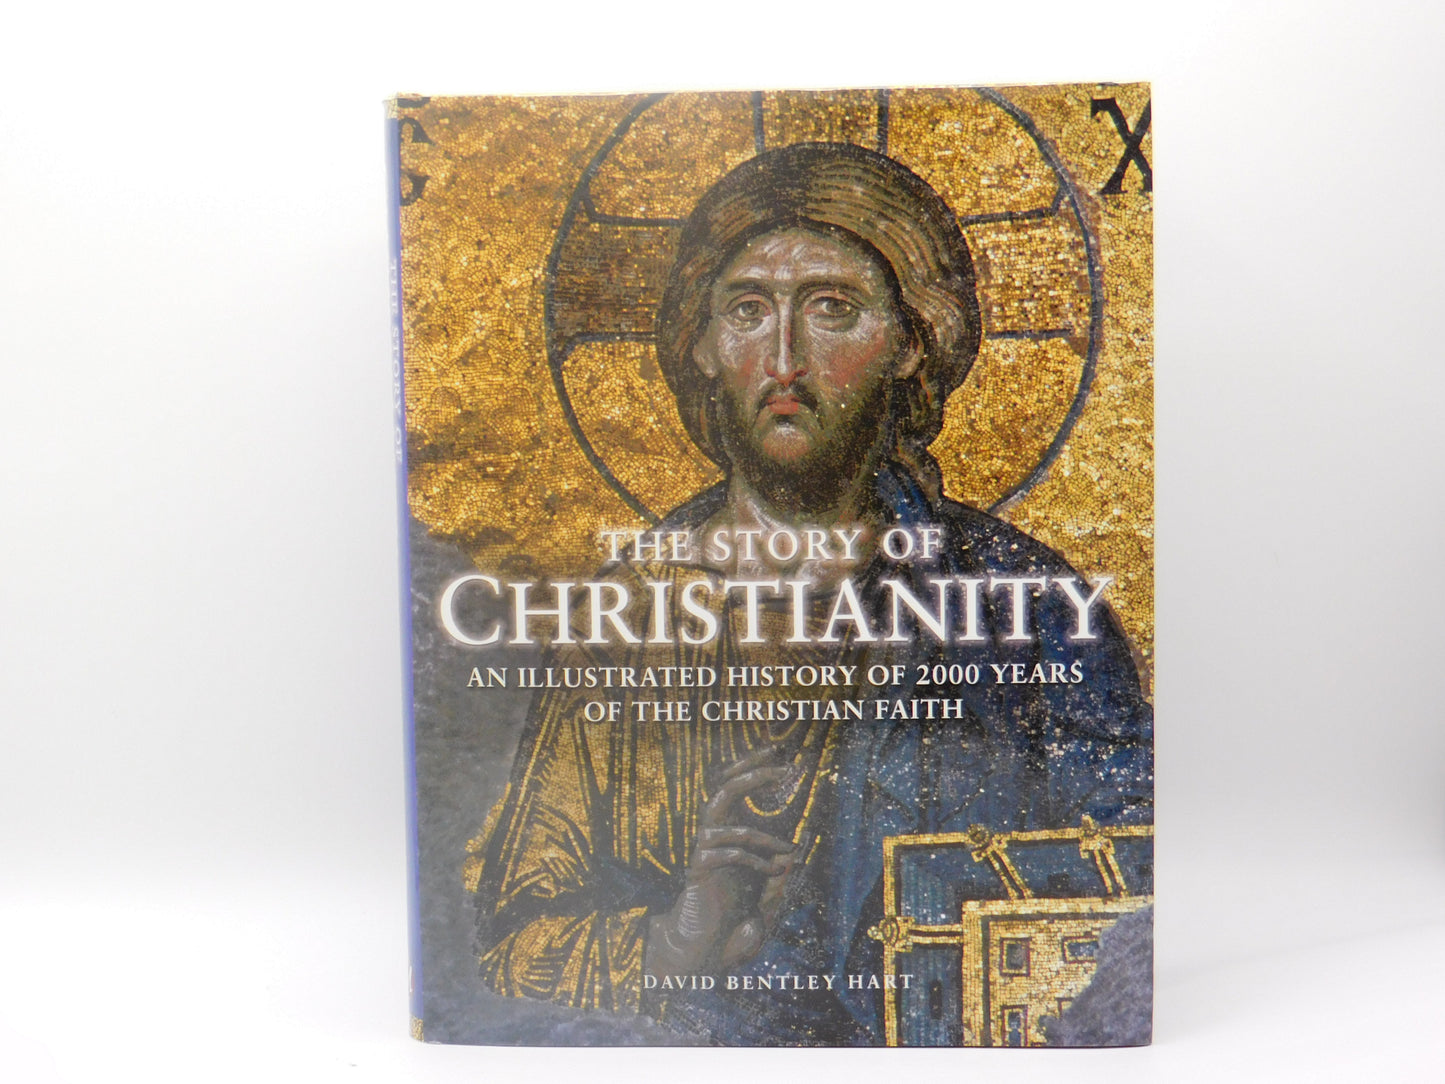 The Story of Christianity by David Bentley Hart